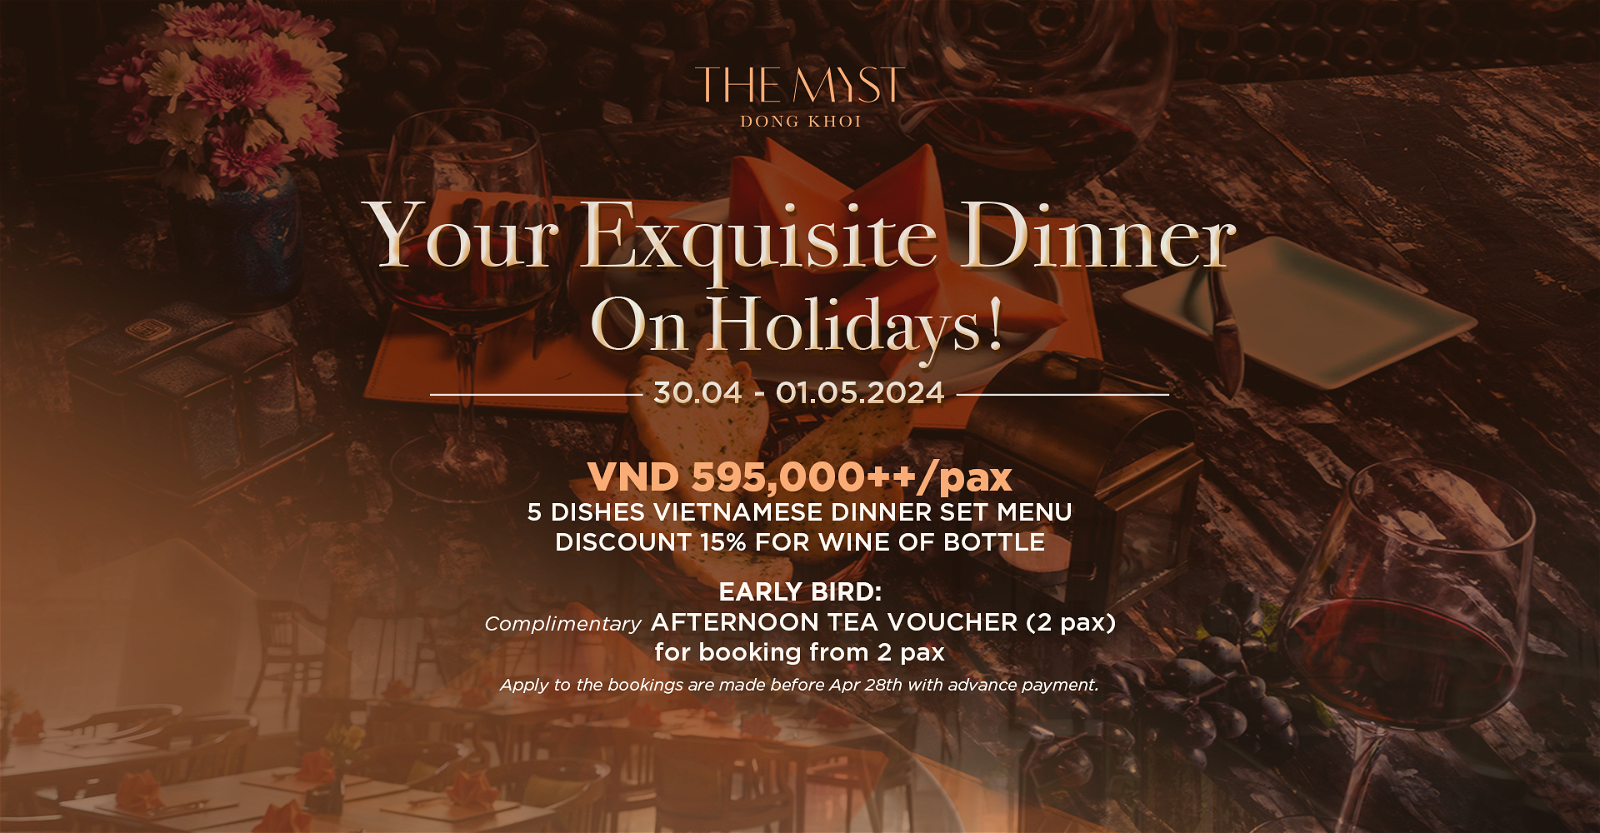 The Myst Dong Khoi – Your Exquisite Dinner on Holidays<br>The Nest Restaurant | 30.04 – 01.05.2024